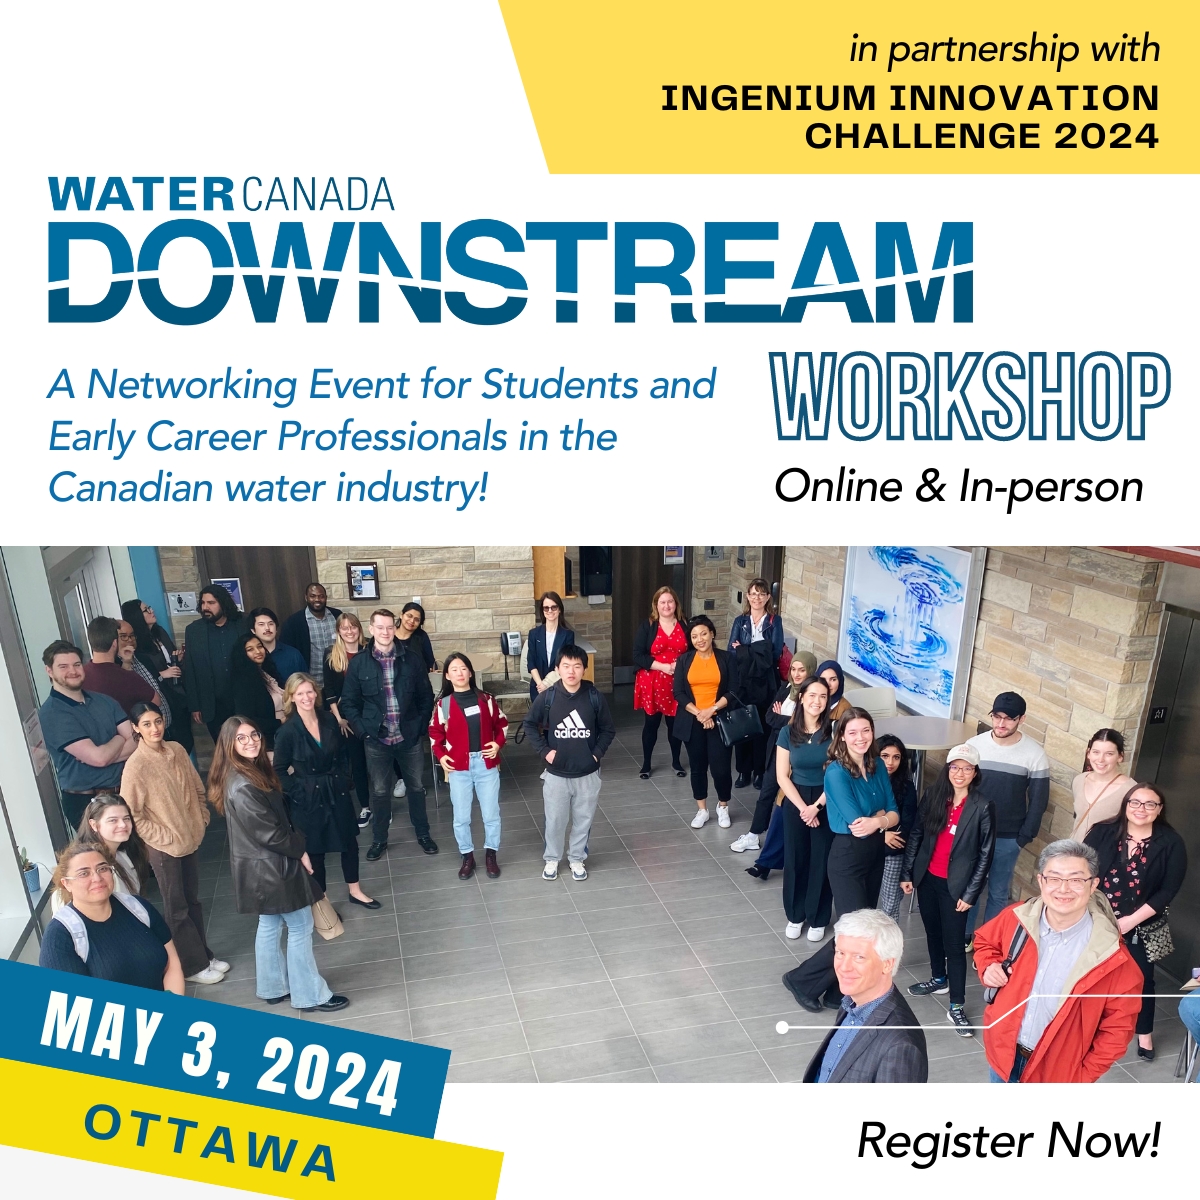 🌊 Water Canada is excited to unveil our collaboration with Ingenium for the 2024 Innovation Challenge! Register here for the Ingenium Innovation Challenge and participate in Downstream ingeniumcanada.org/innovation-cha…